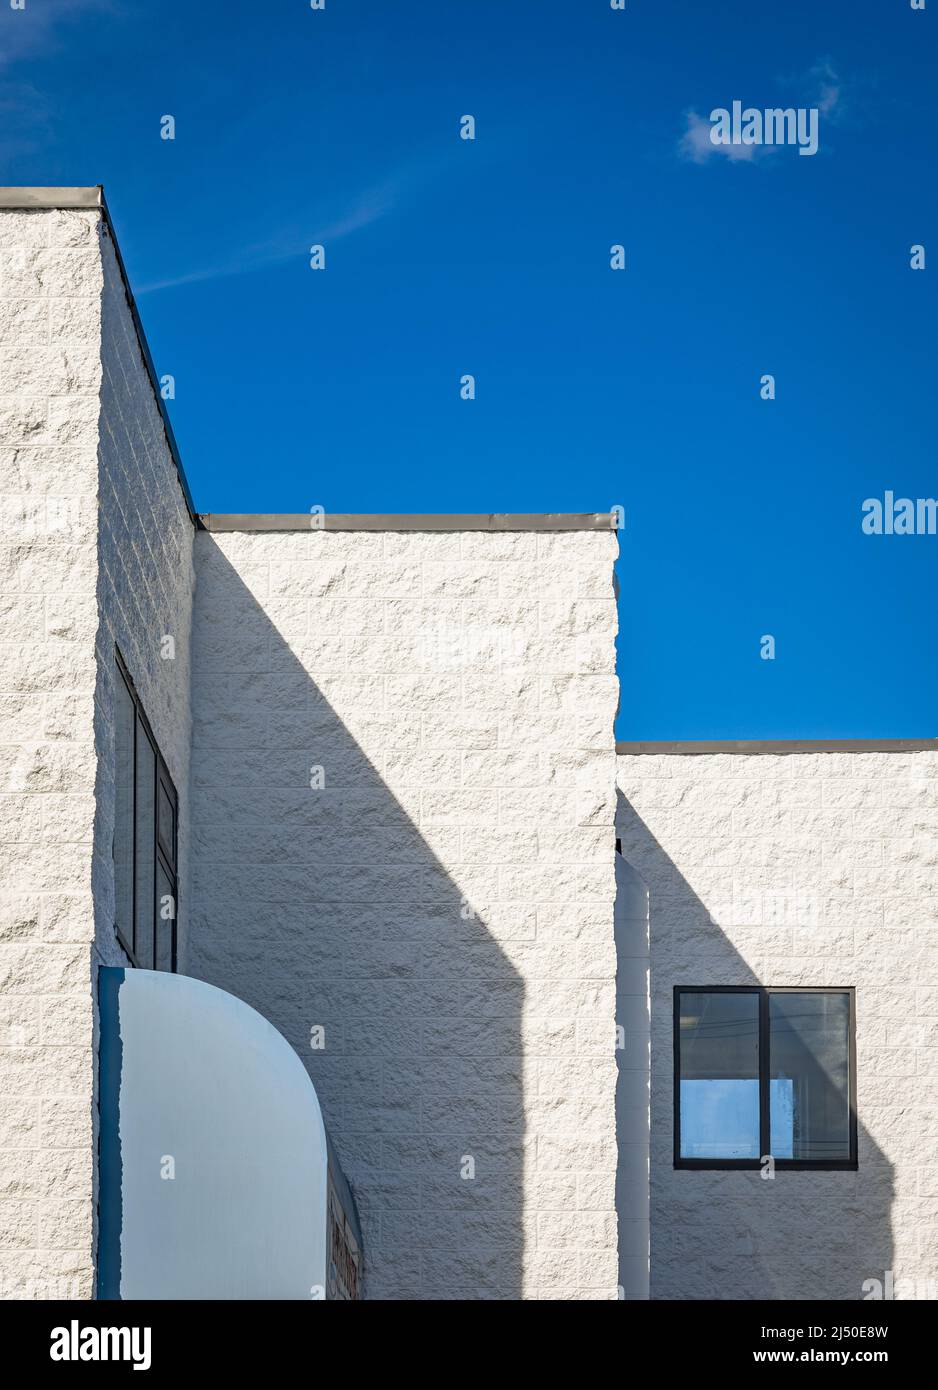 Abstract architecture against blue sky. Modern white building against a blue sky. Street photo, nobody, copy space for text Stock Photo